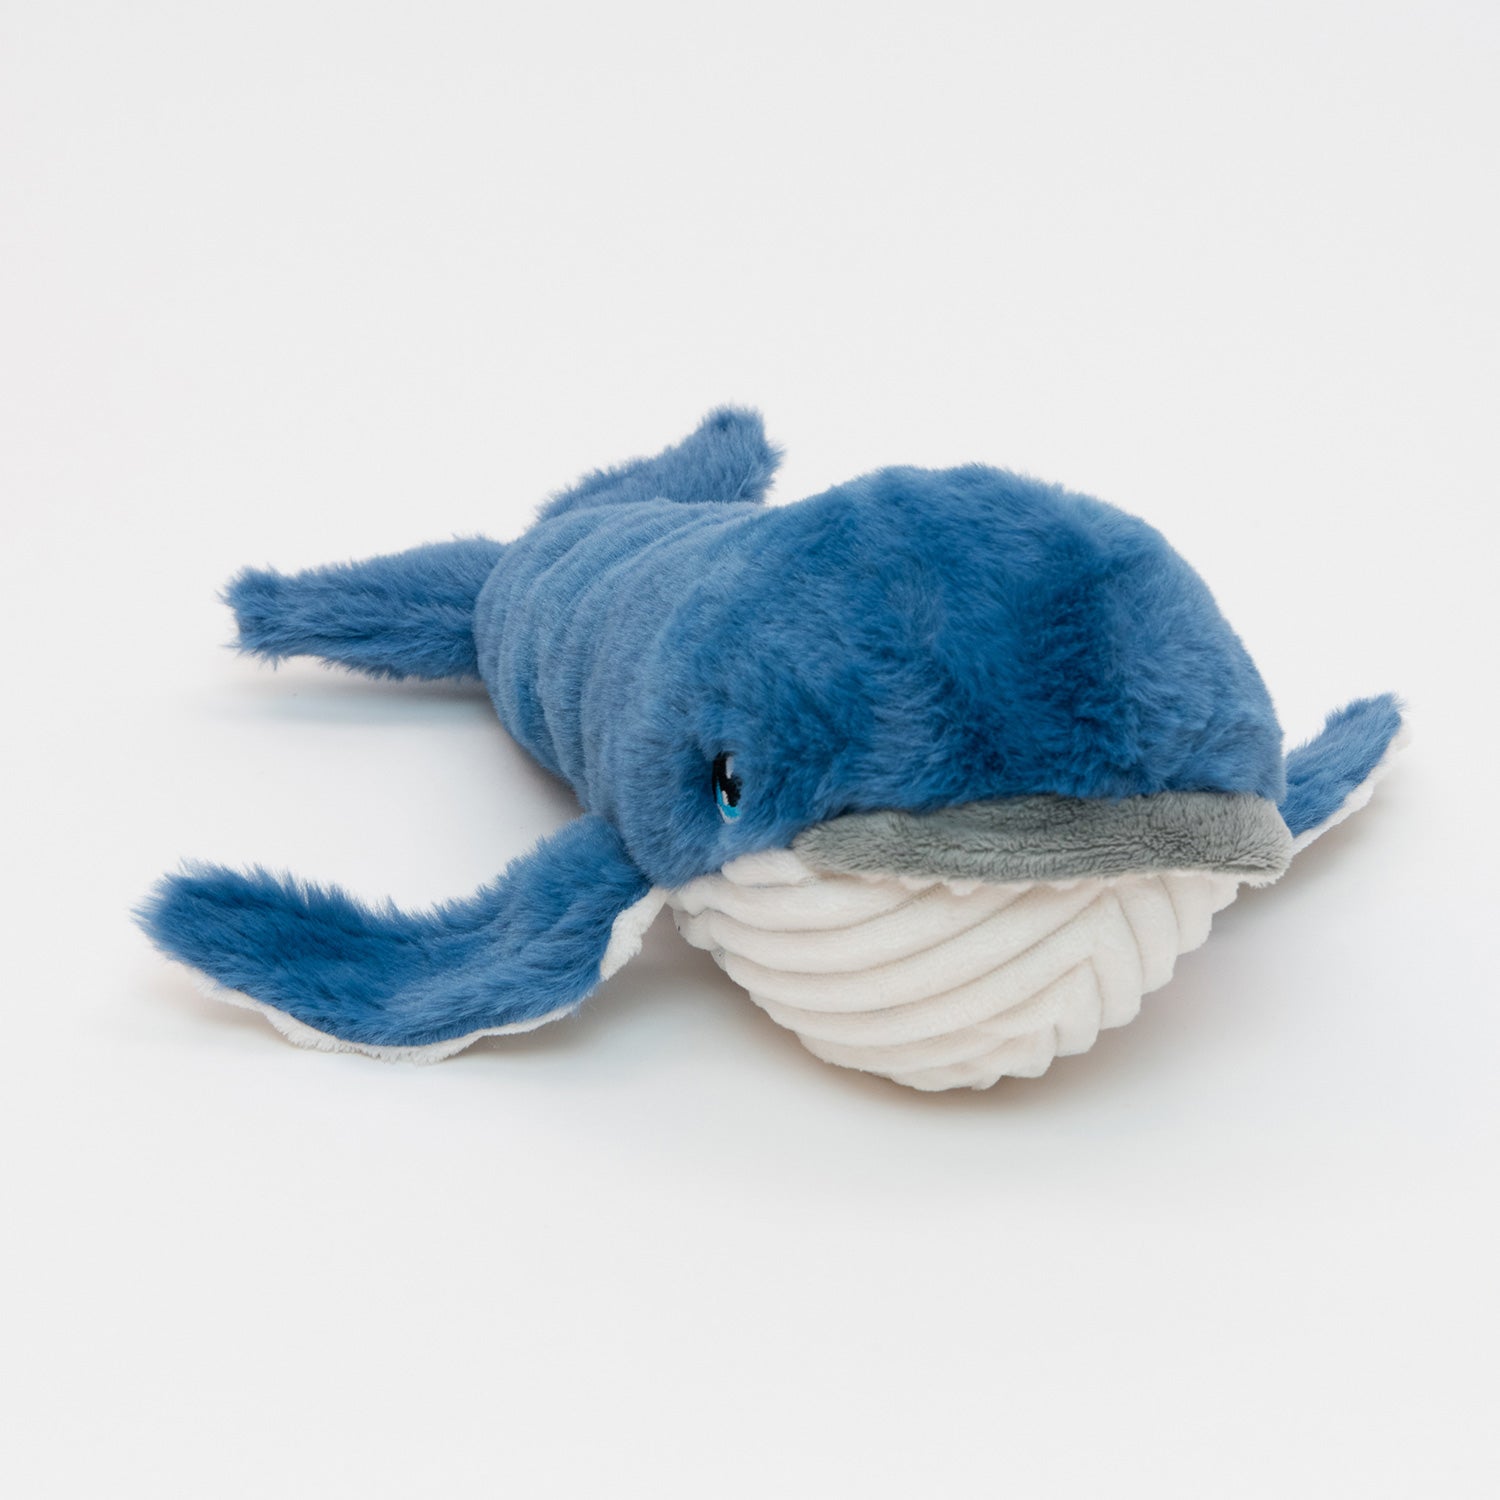 A blue and white plush whale soft toy, pictured on a white background.